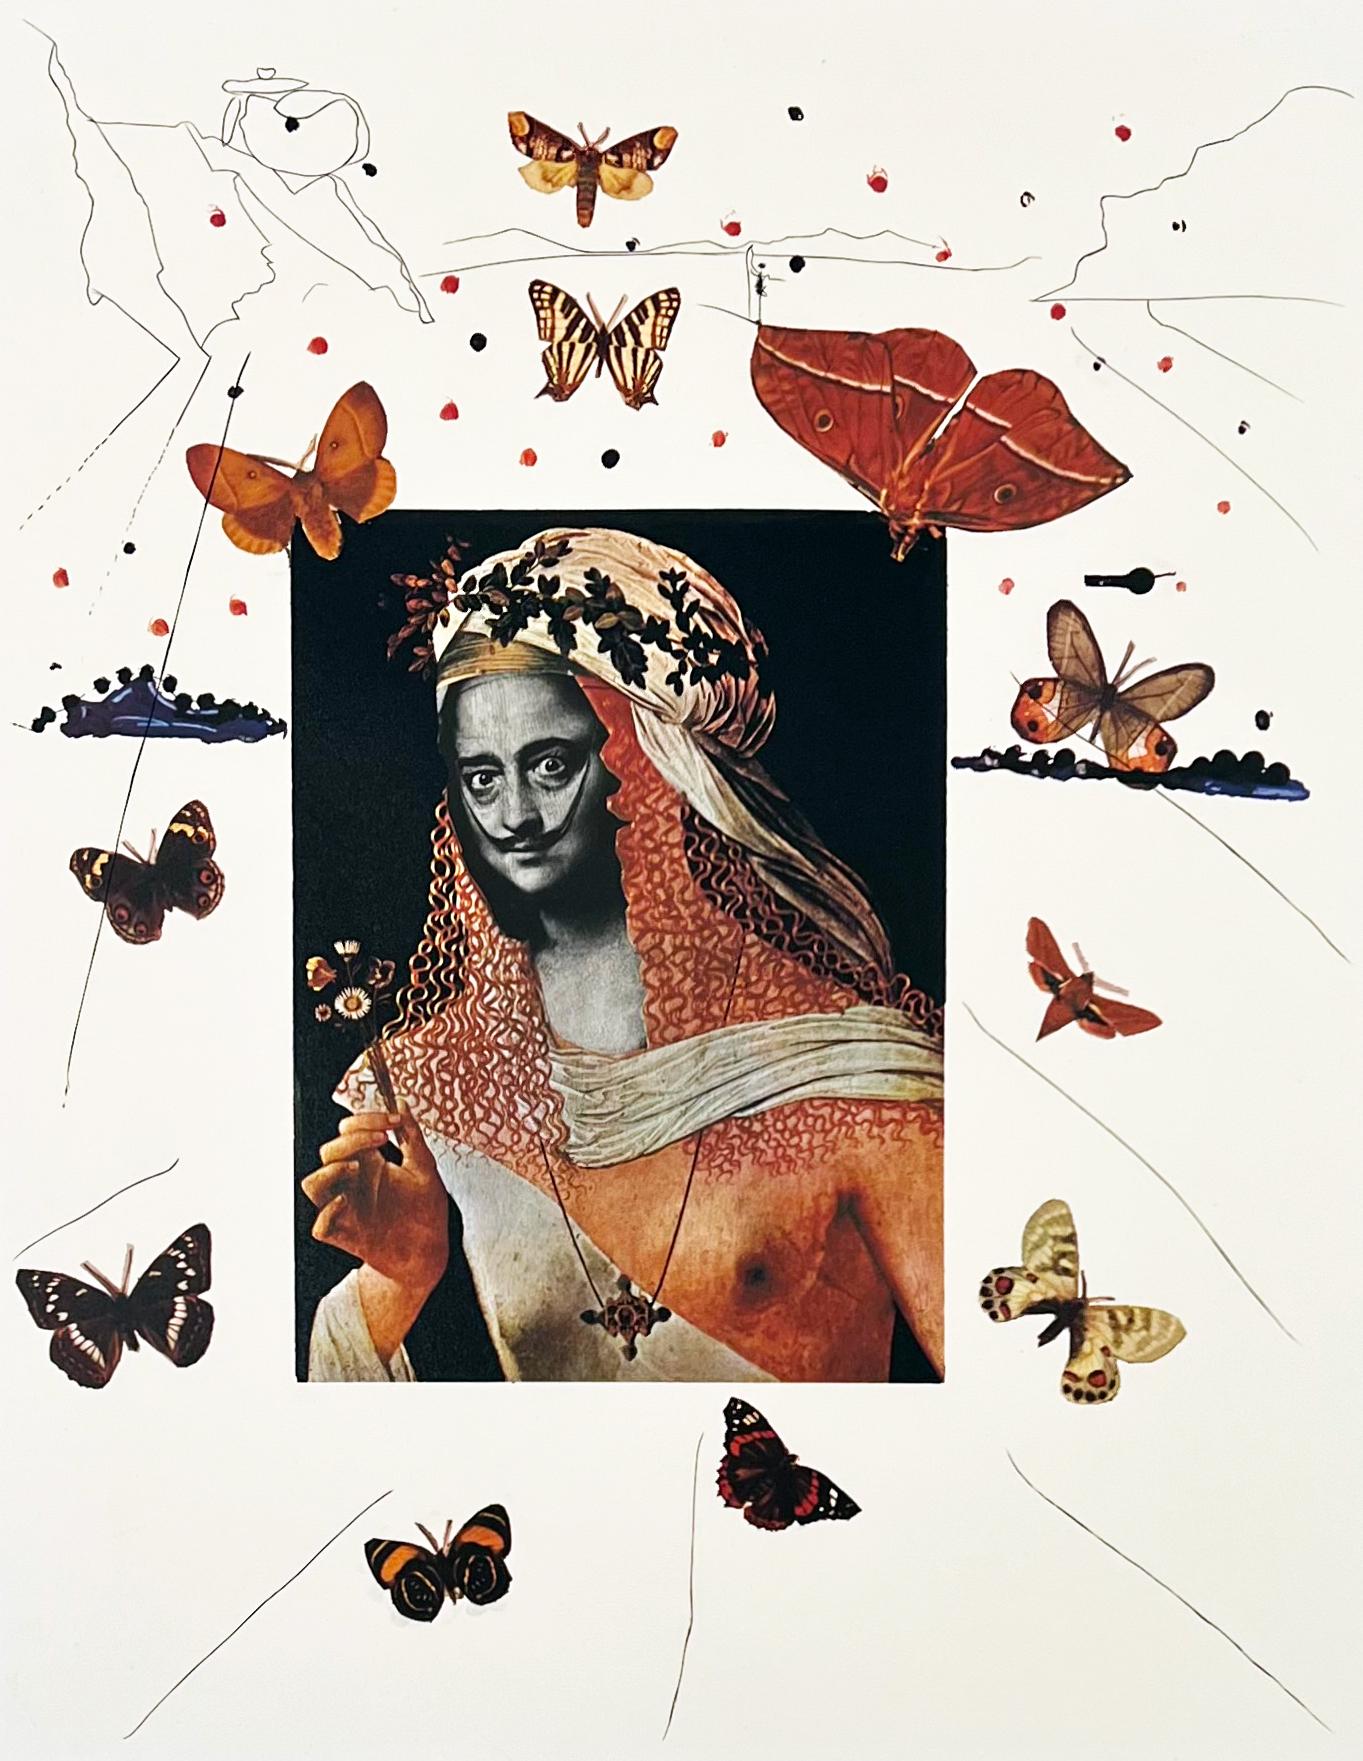 Salvador Dalí Abstract Print - Surrealist Portrait of Dali Surrounded by Butterflies, Memories of Surrealism